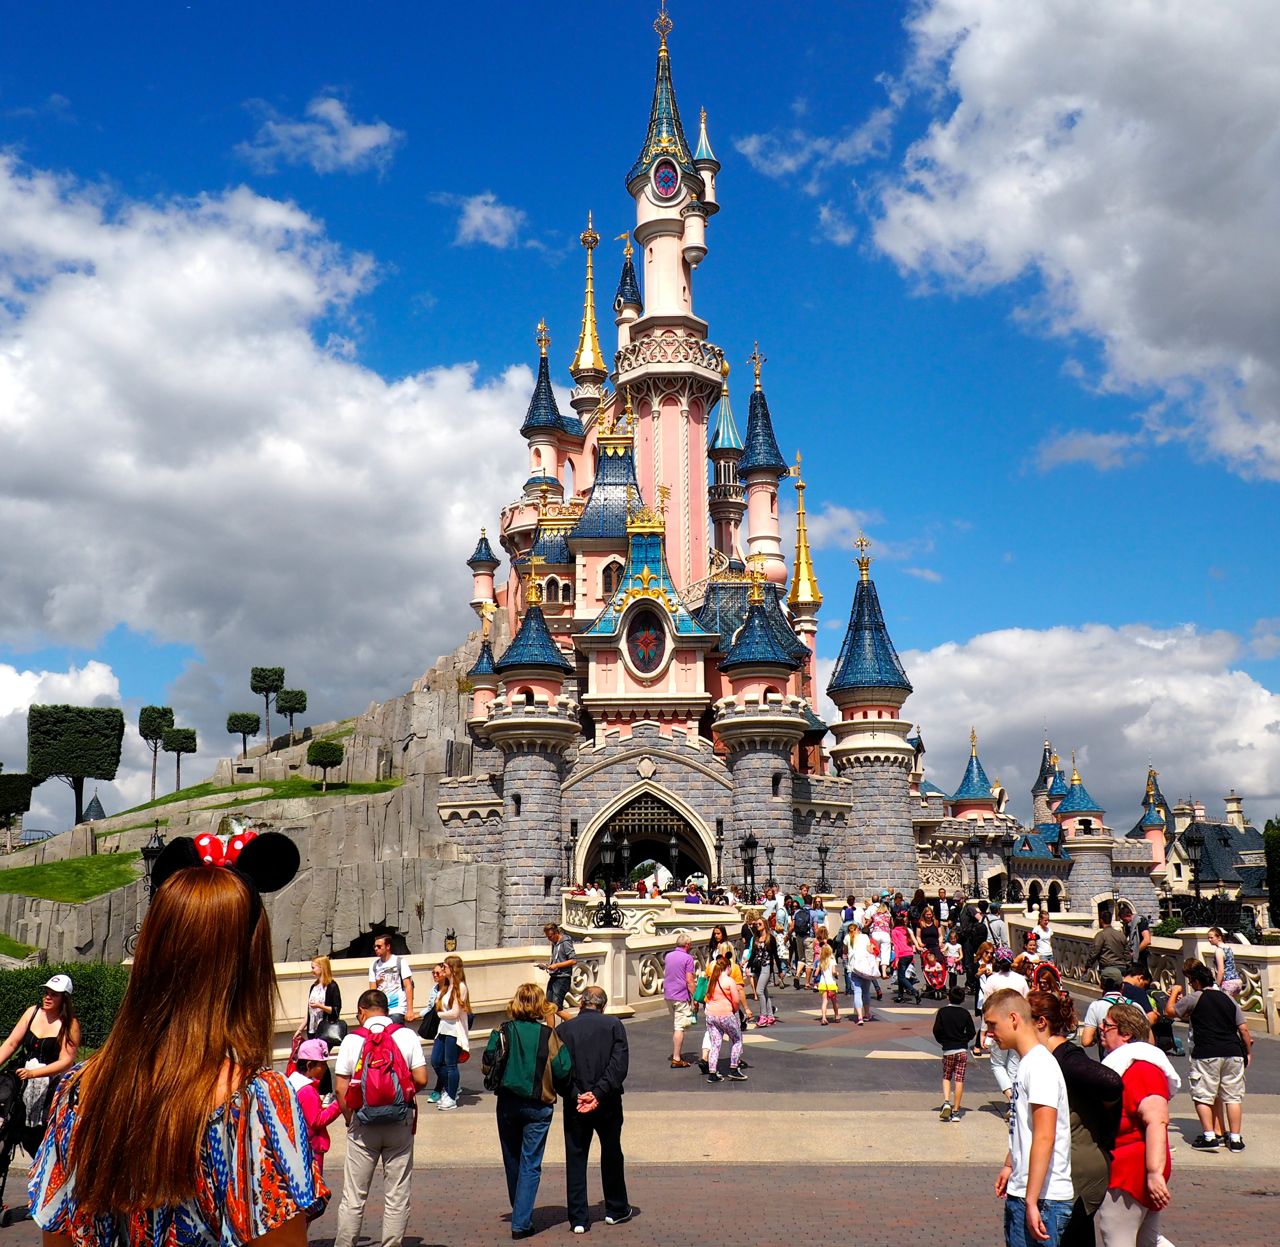 Your visit to Disneyland should be magical and a day to remember. Here is a little guide with